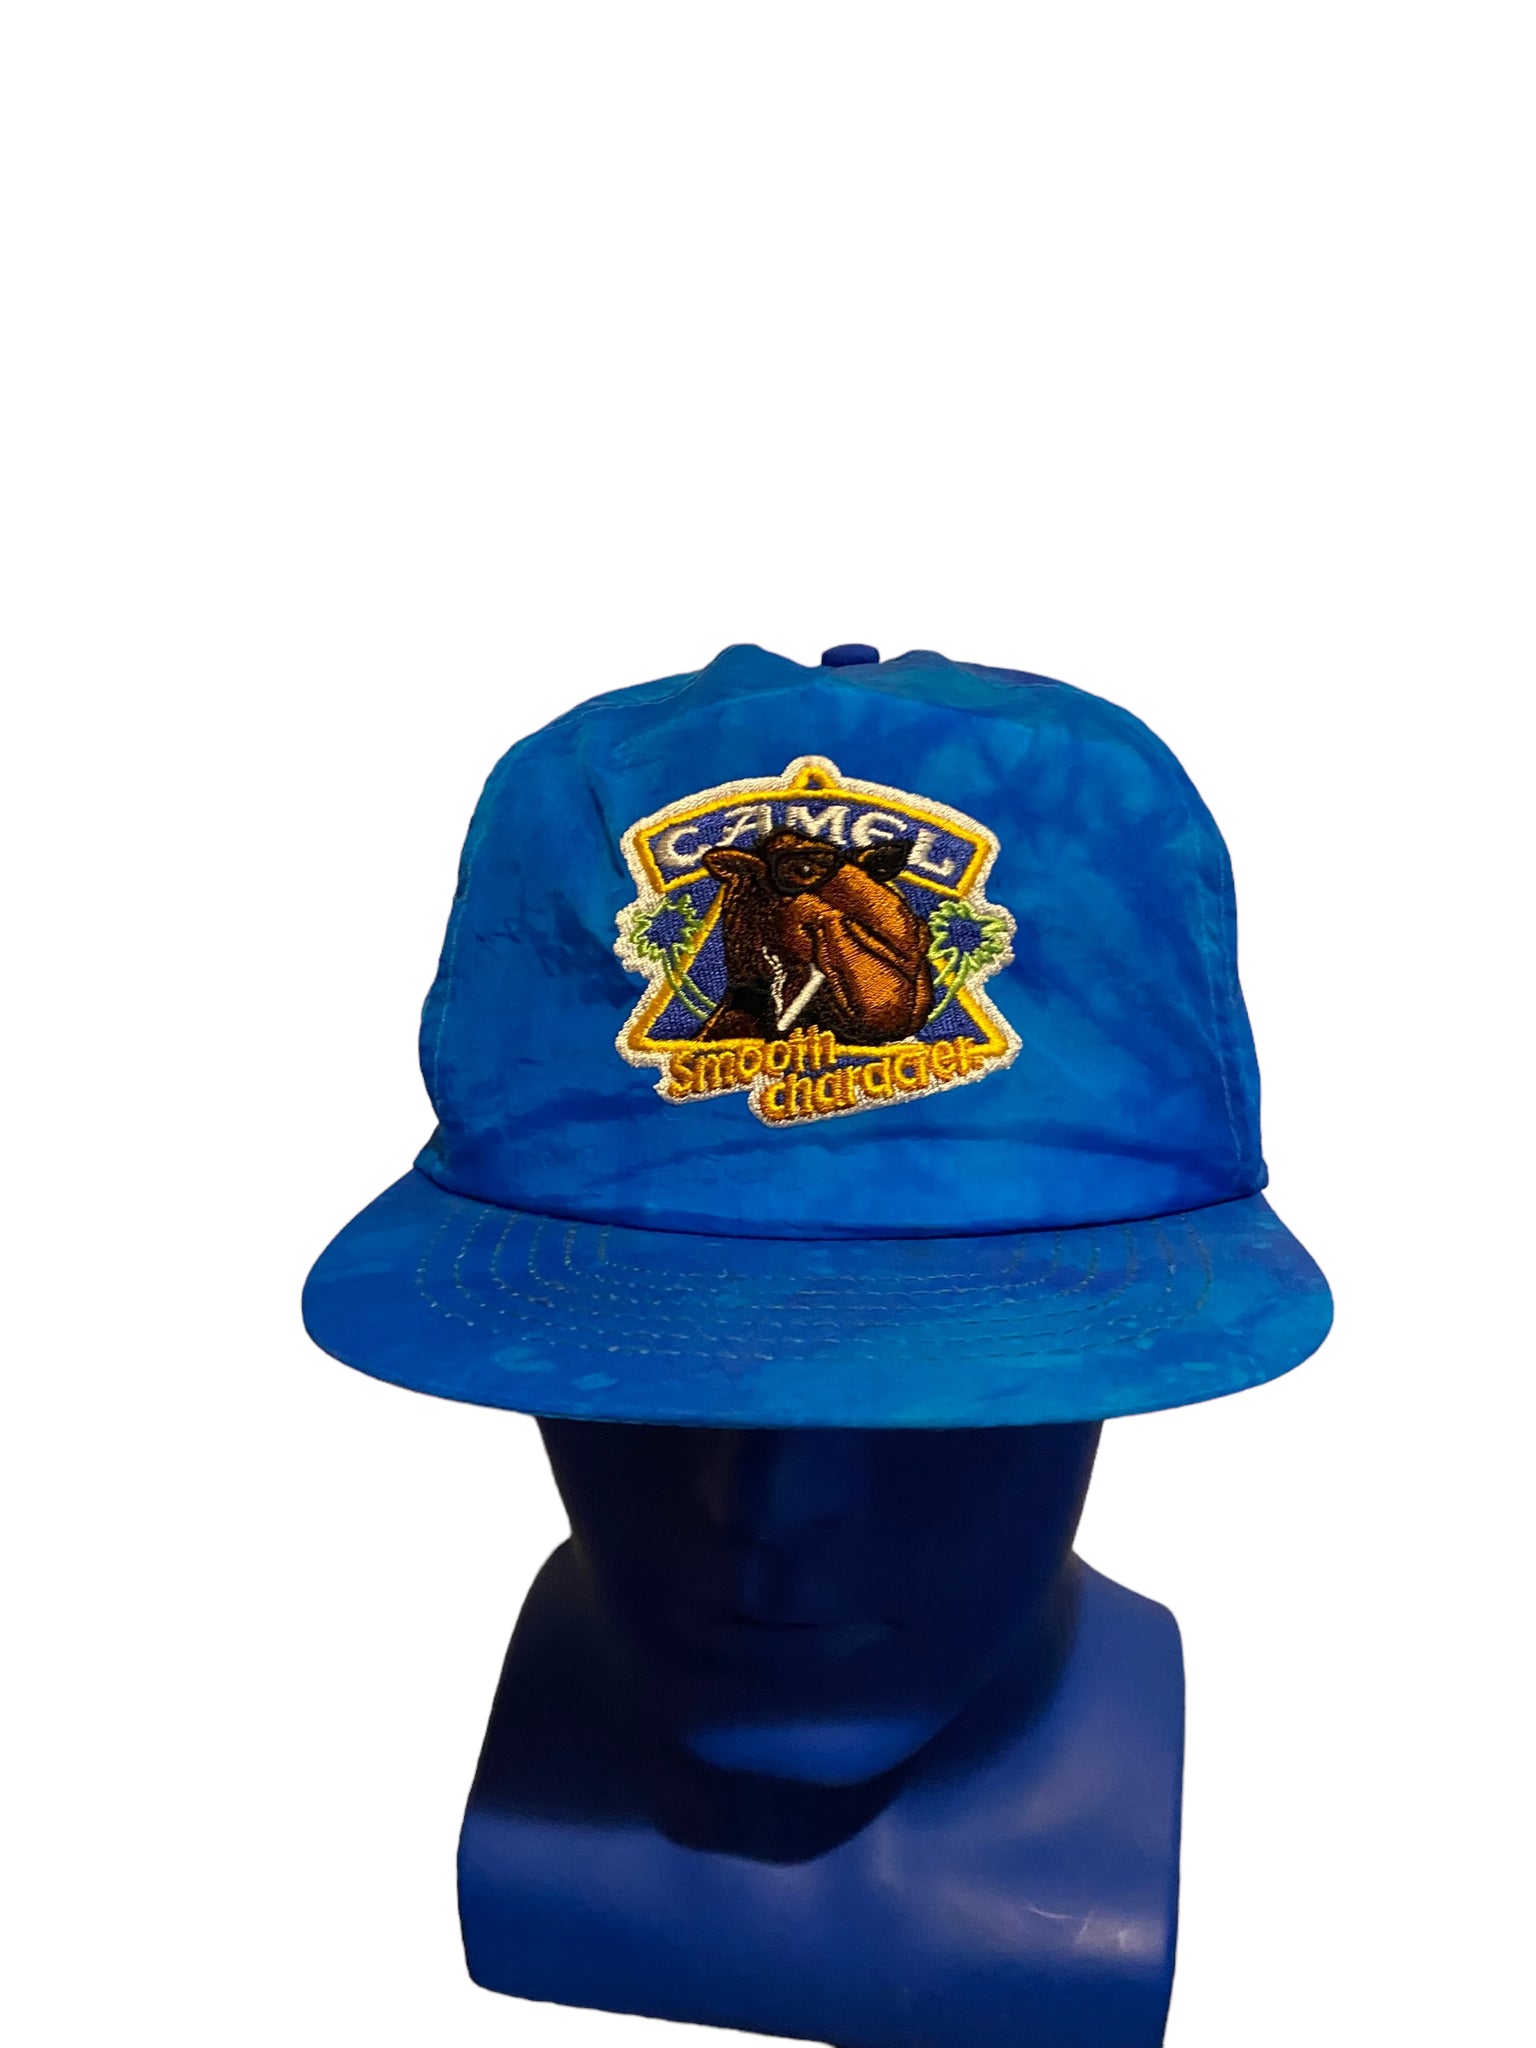 Vintage Joe Camel Cigarettes Smooth Character SnapBack Hat Blue Tie Dye (small)